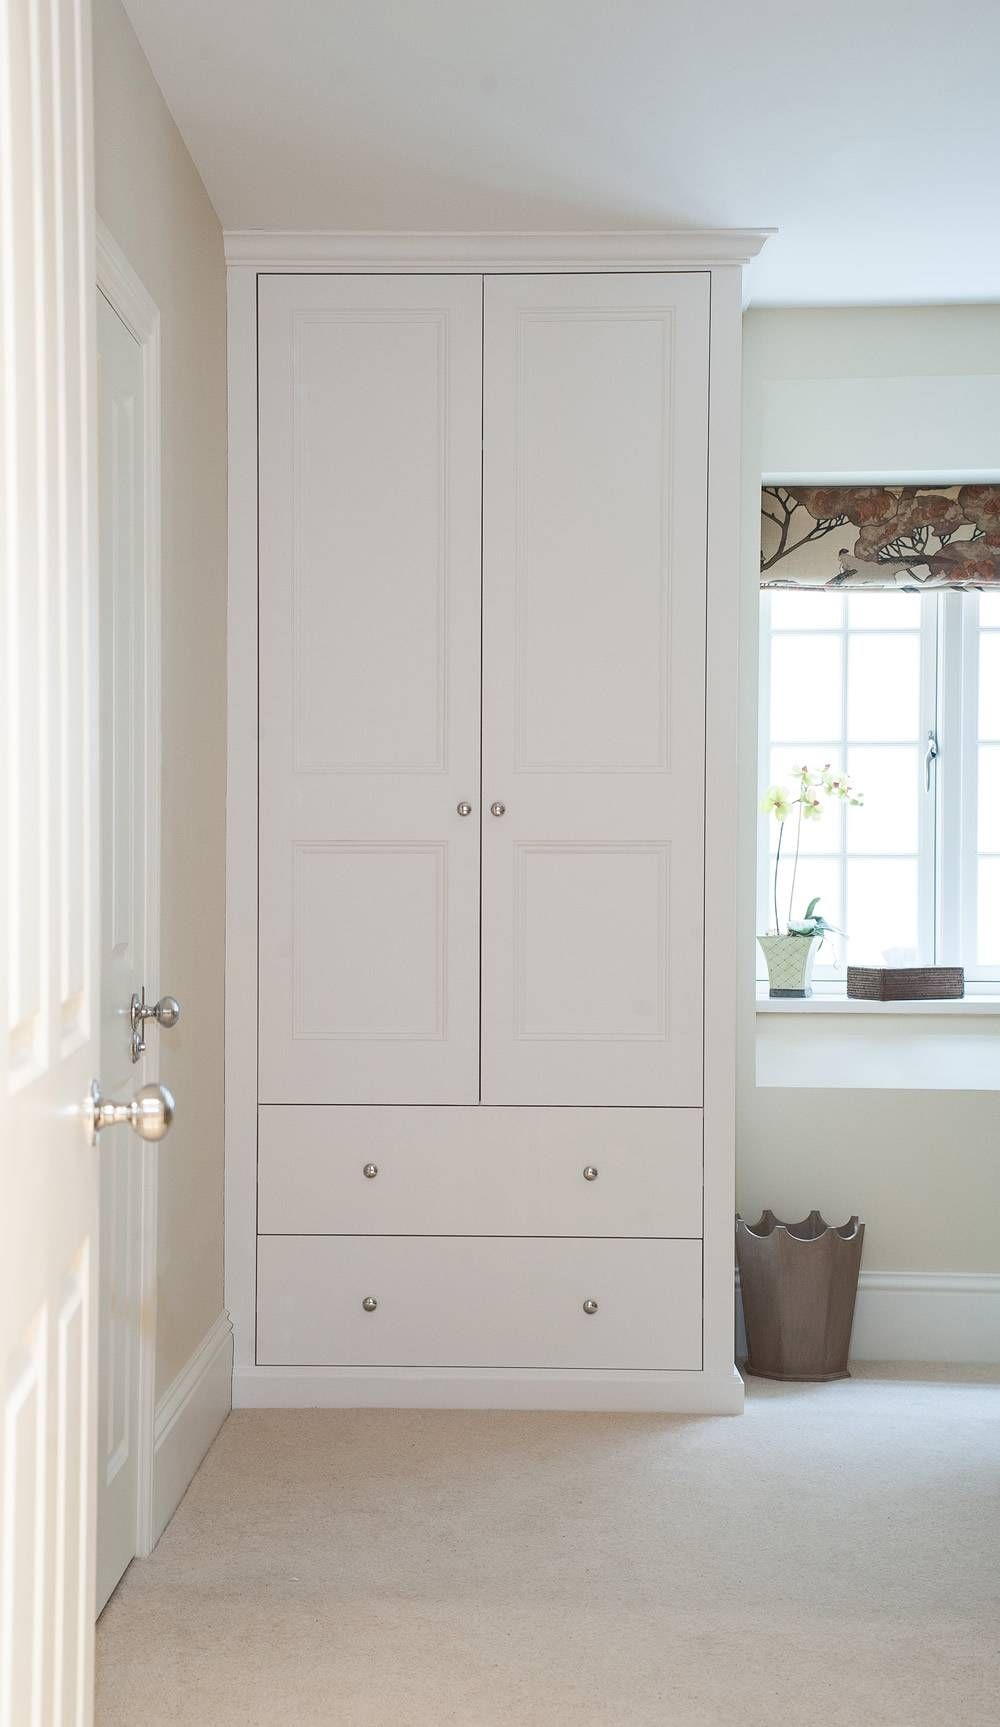 Bespoke Fitted Wardrobes And Cupboards | London Alcove Company Regarding Alcove Wardrobes Designs (View 27 of 30)